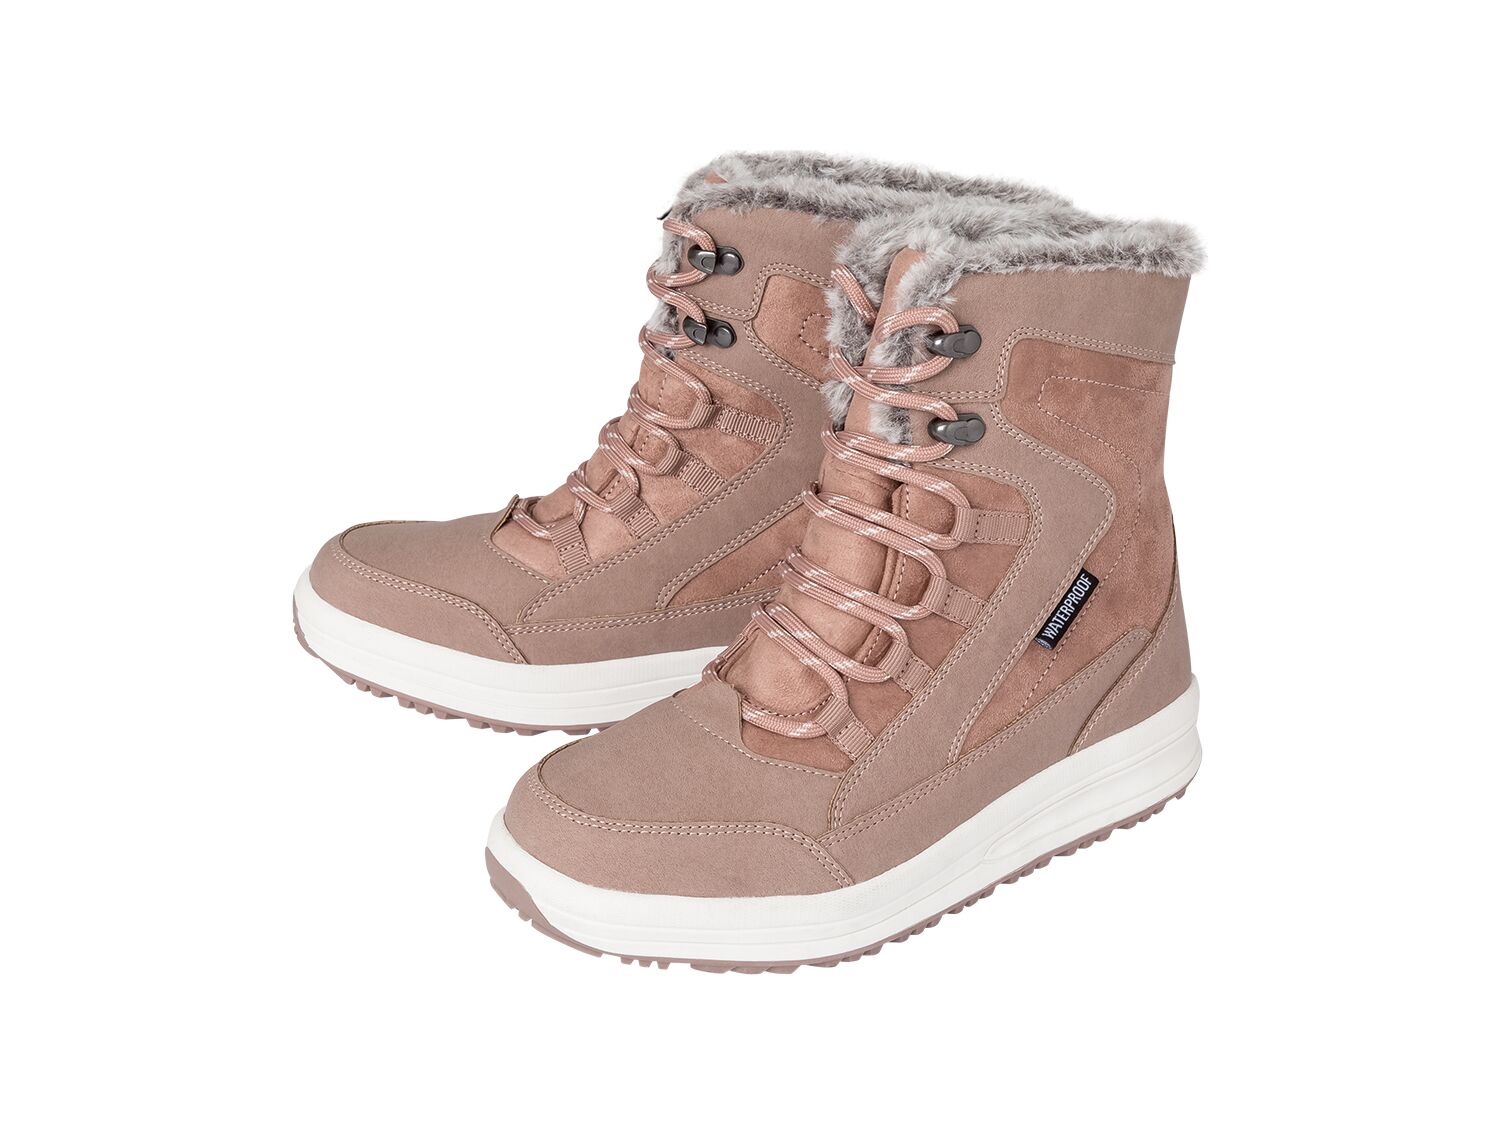 Botas impermeables nude mujer lidl